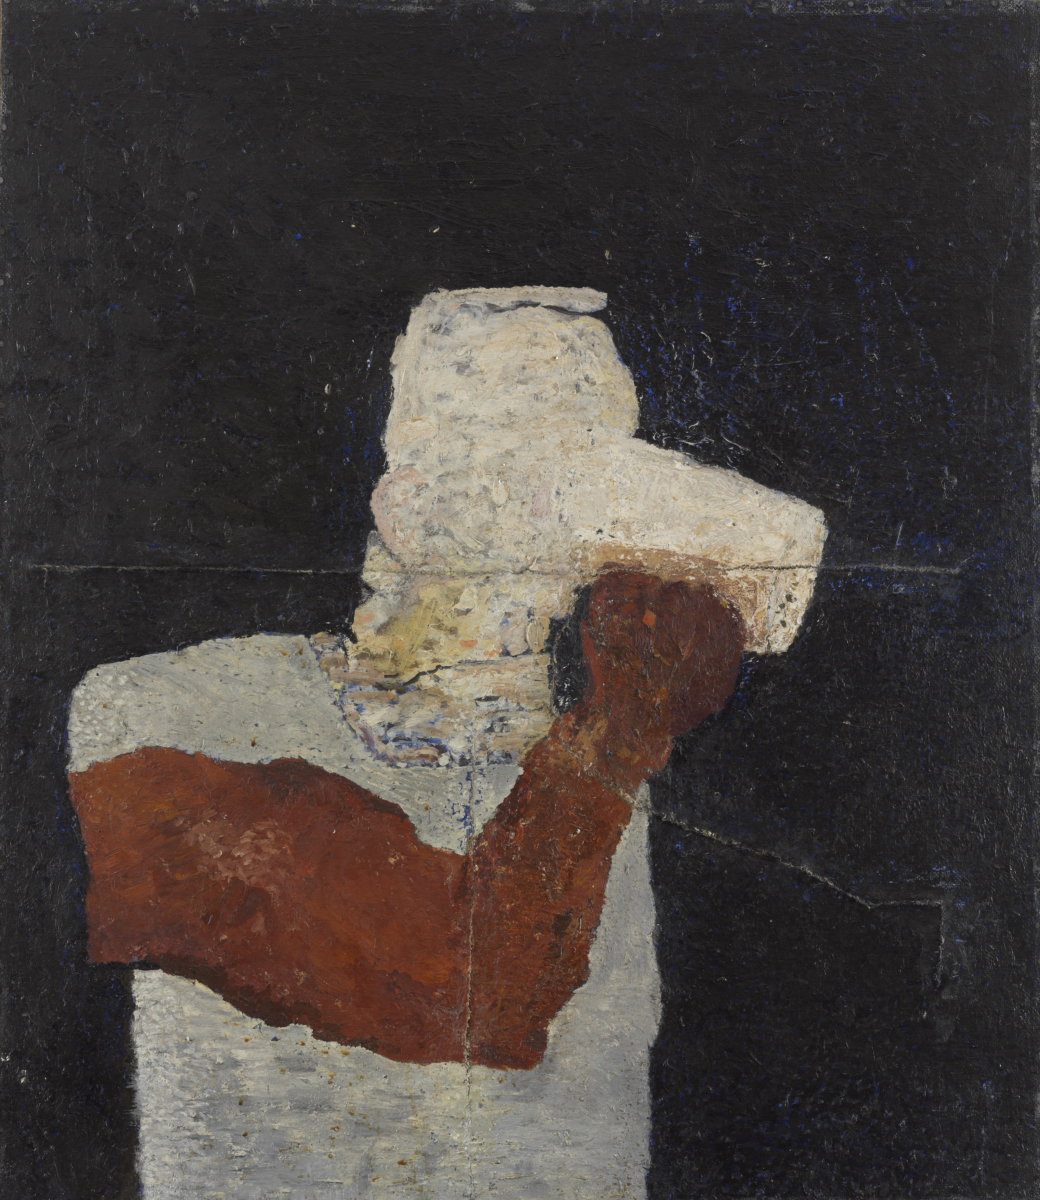 Man with a beer, oil on canvas, 87 x 65 cm (1965)